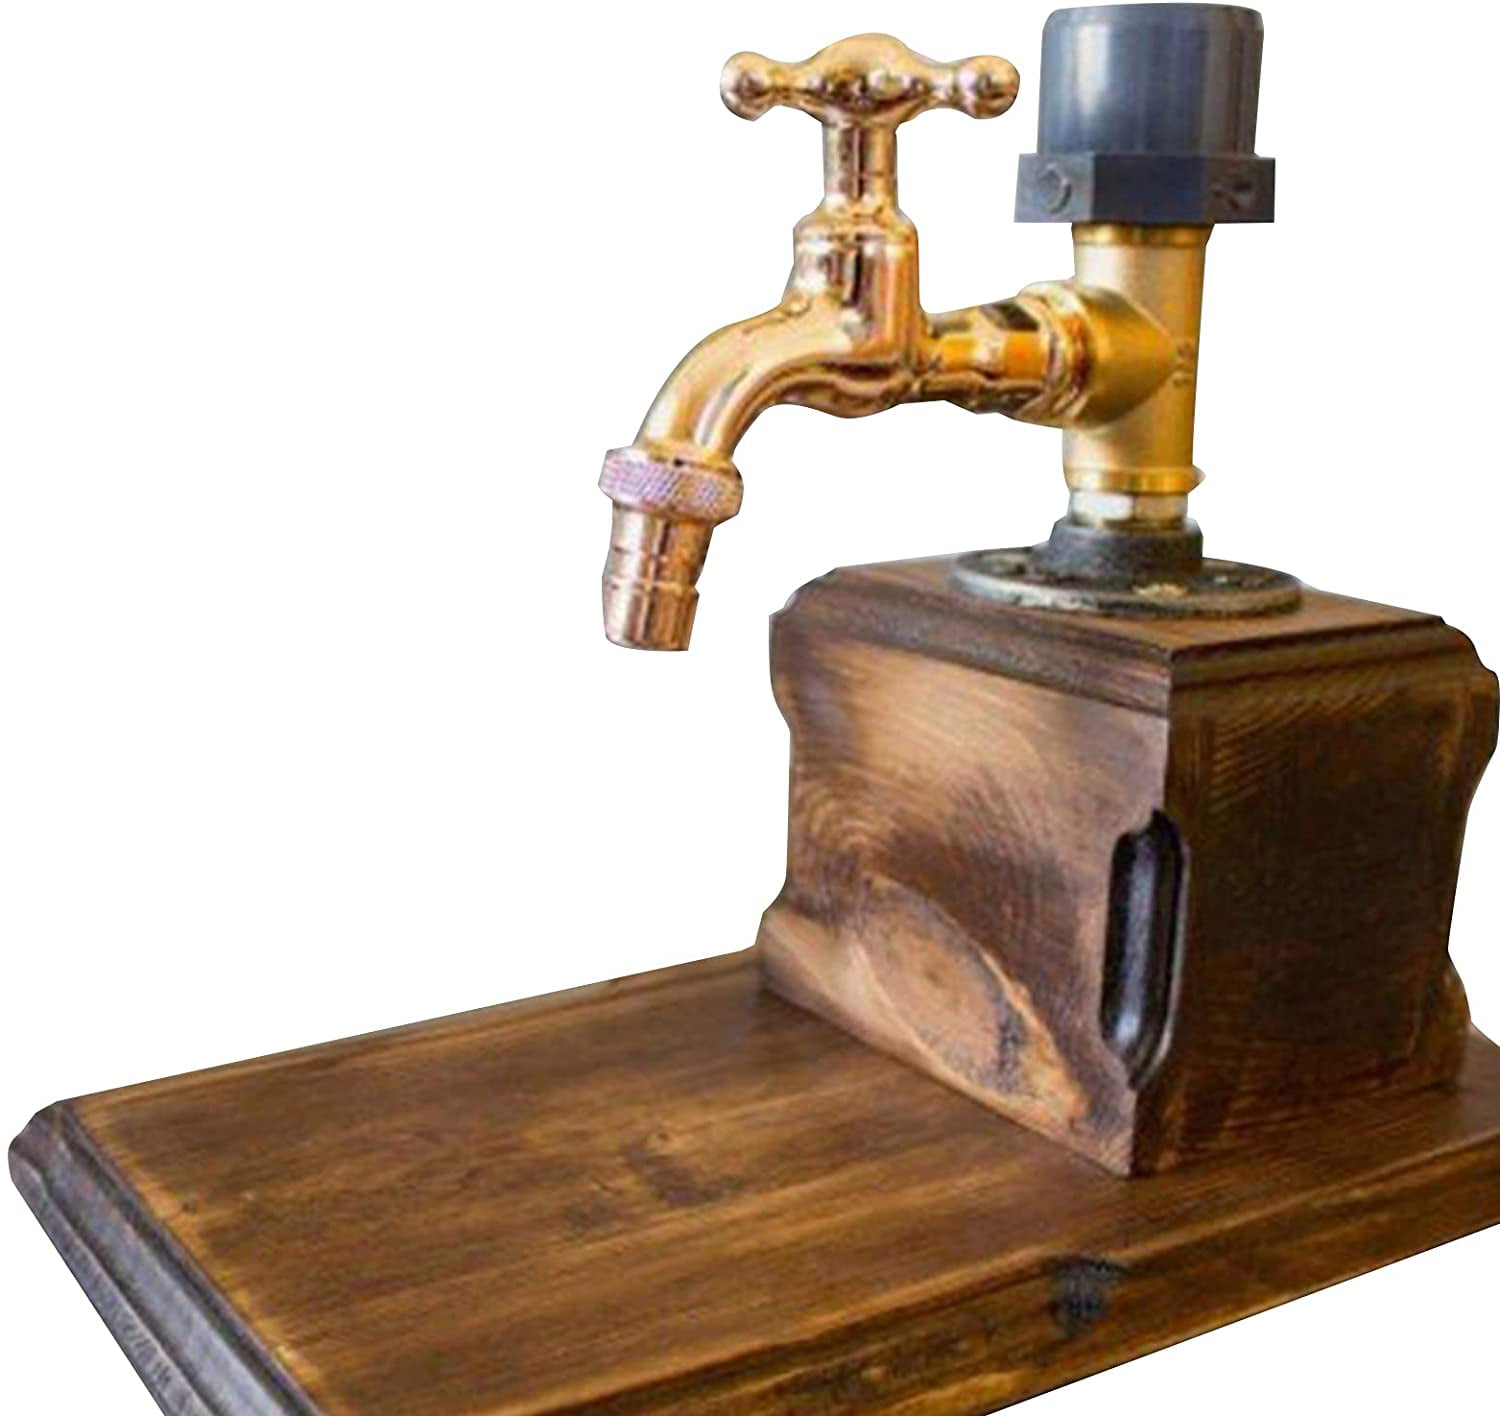 Beer Taps for Home Bars Fathers Day Liquor Alcohol Whiskey Wood for Party Beverage Wine Racks Cocktail Dispenser Wine Holder Double Bar Pumps Drinks & Beverage Dispenser with Tap 